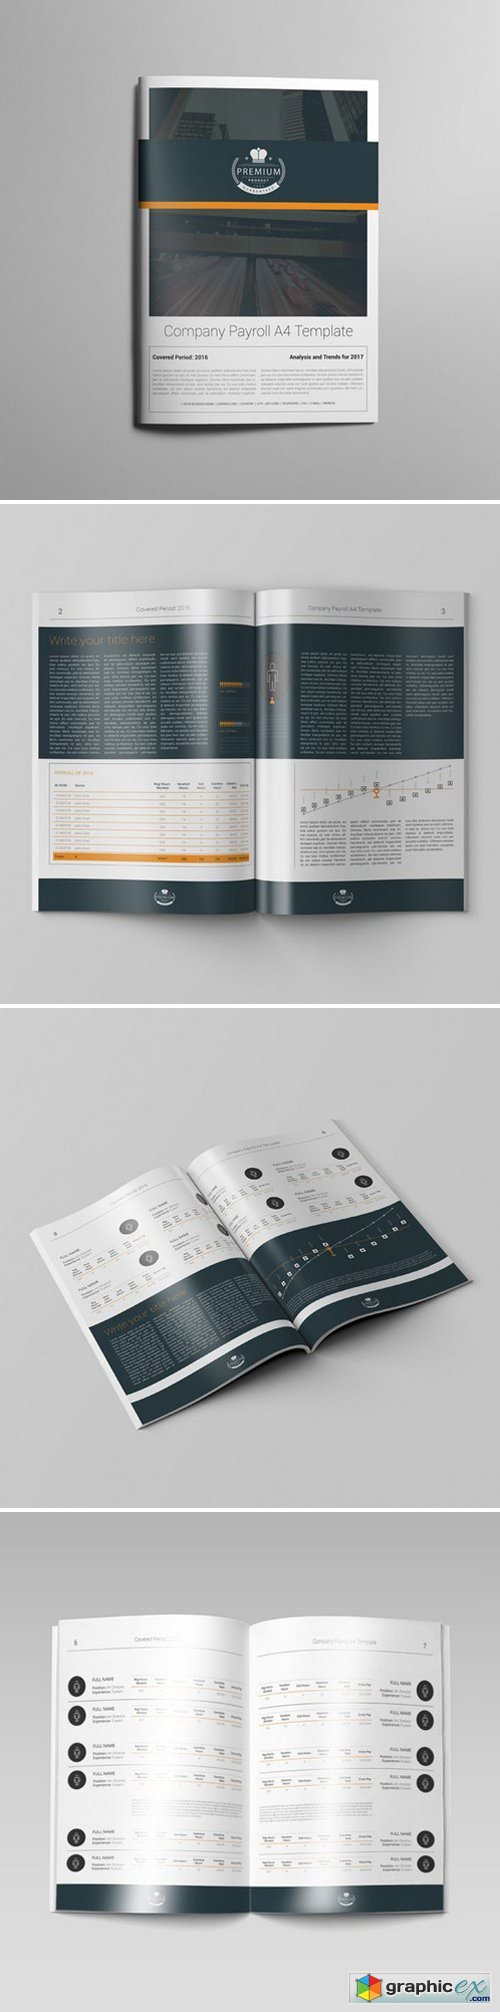 KeBoto - Company Payroll A4 Template